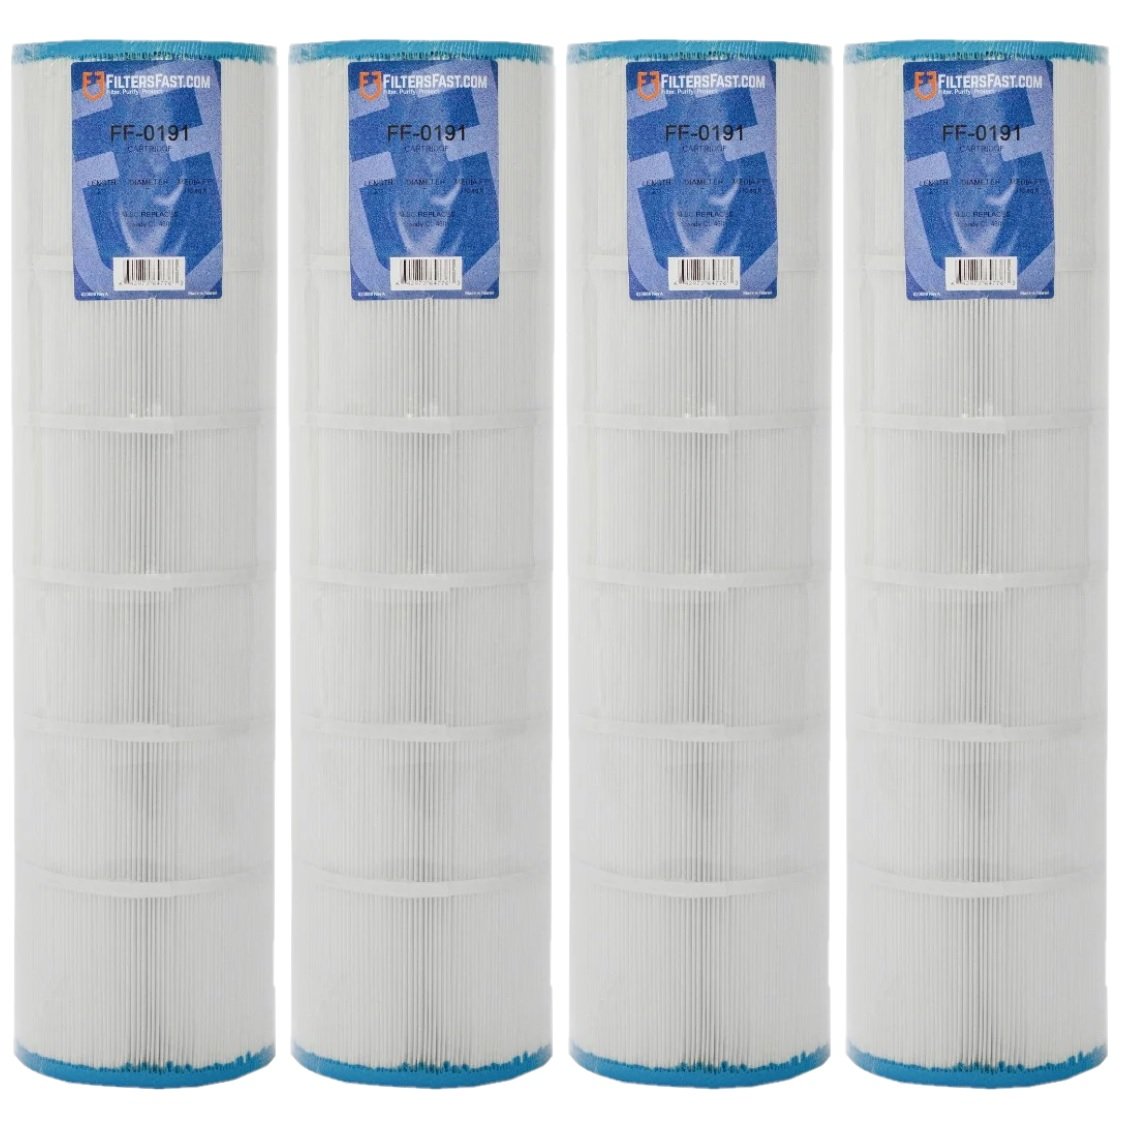 Filters Fast® FF-0191 Replacement Pool & Spa Filter Cartridge - 4-Pack